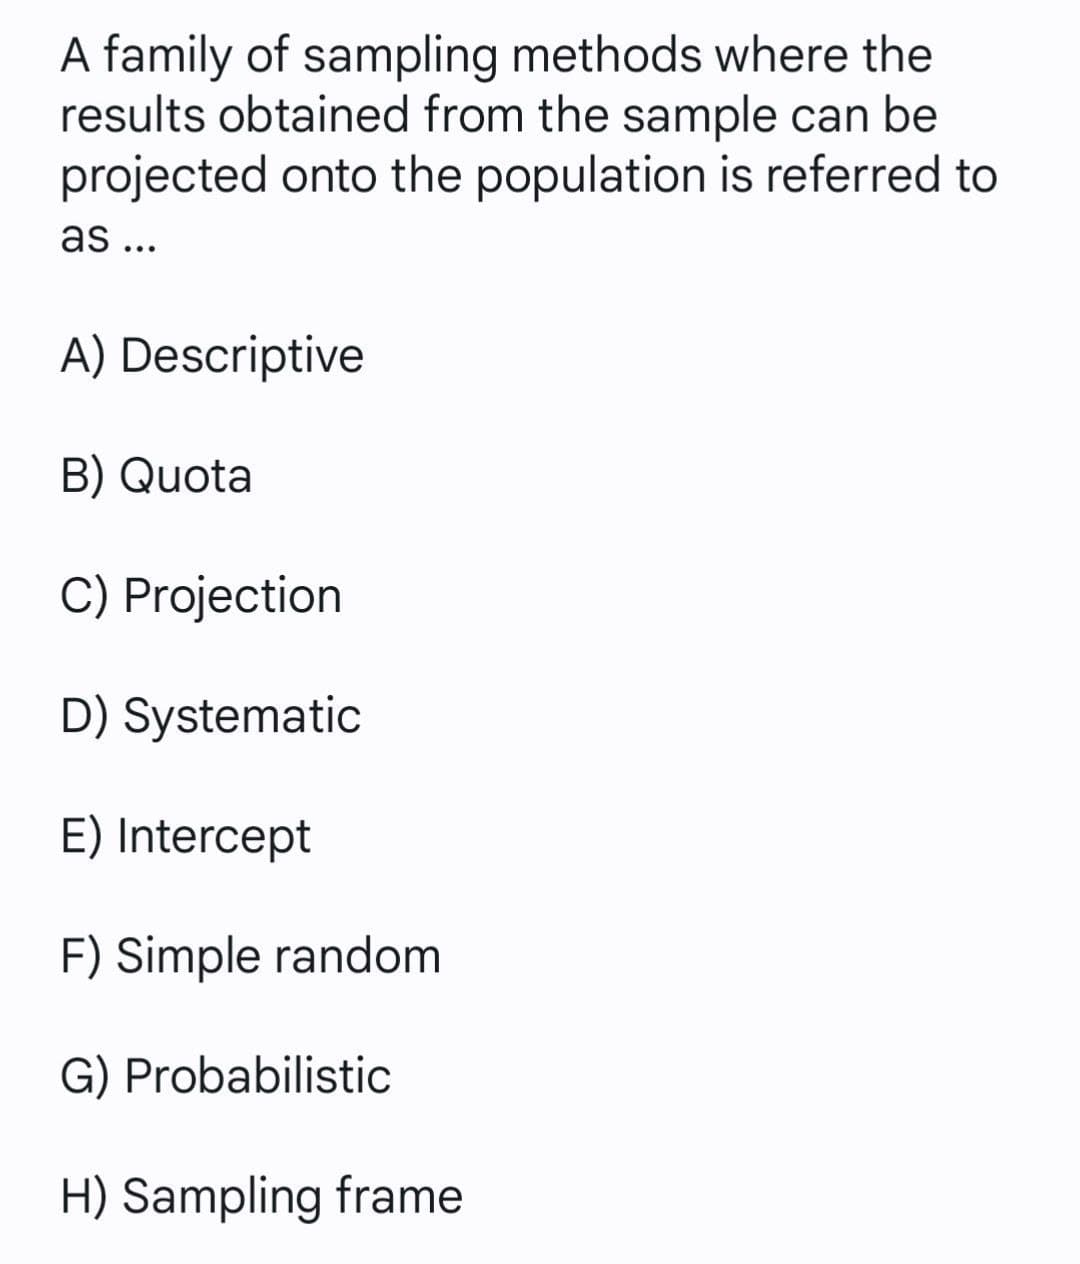 A family of sampling methods where the
results obtained from the sample can be
projected onto the population is referred to
as ...
A) Descriptive
B) Quota
C) Projection
D) Systematic
E) Intercept
F) Simple random
G) Probabilistic
H) Sampling frame
